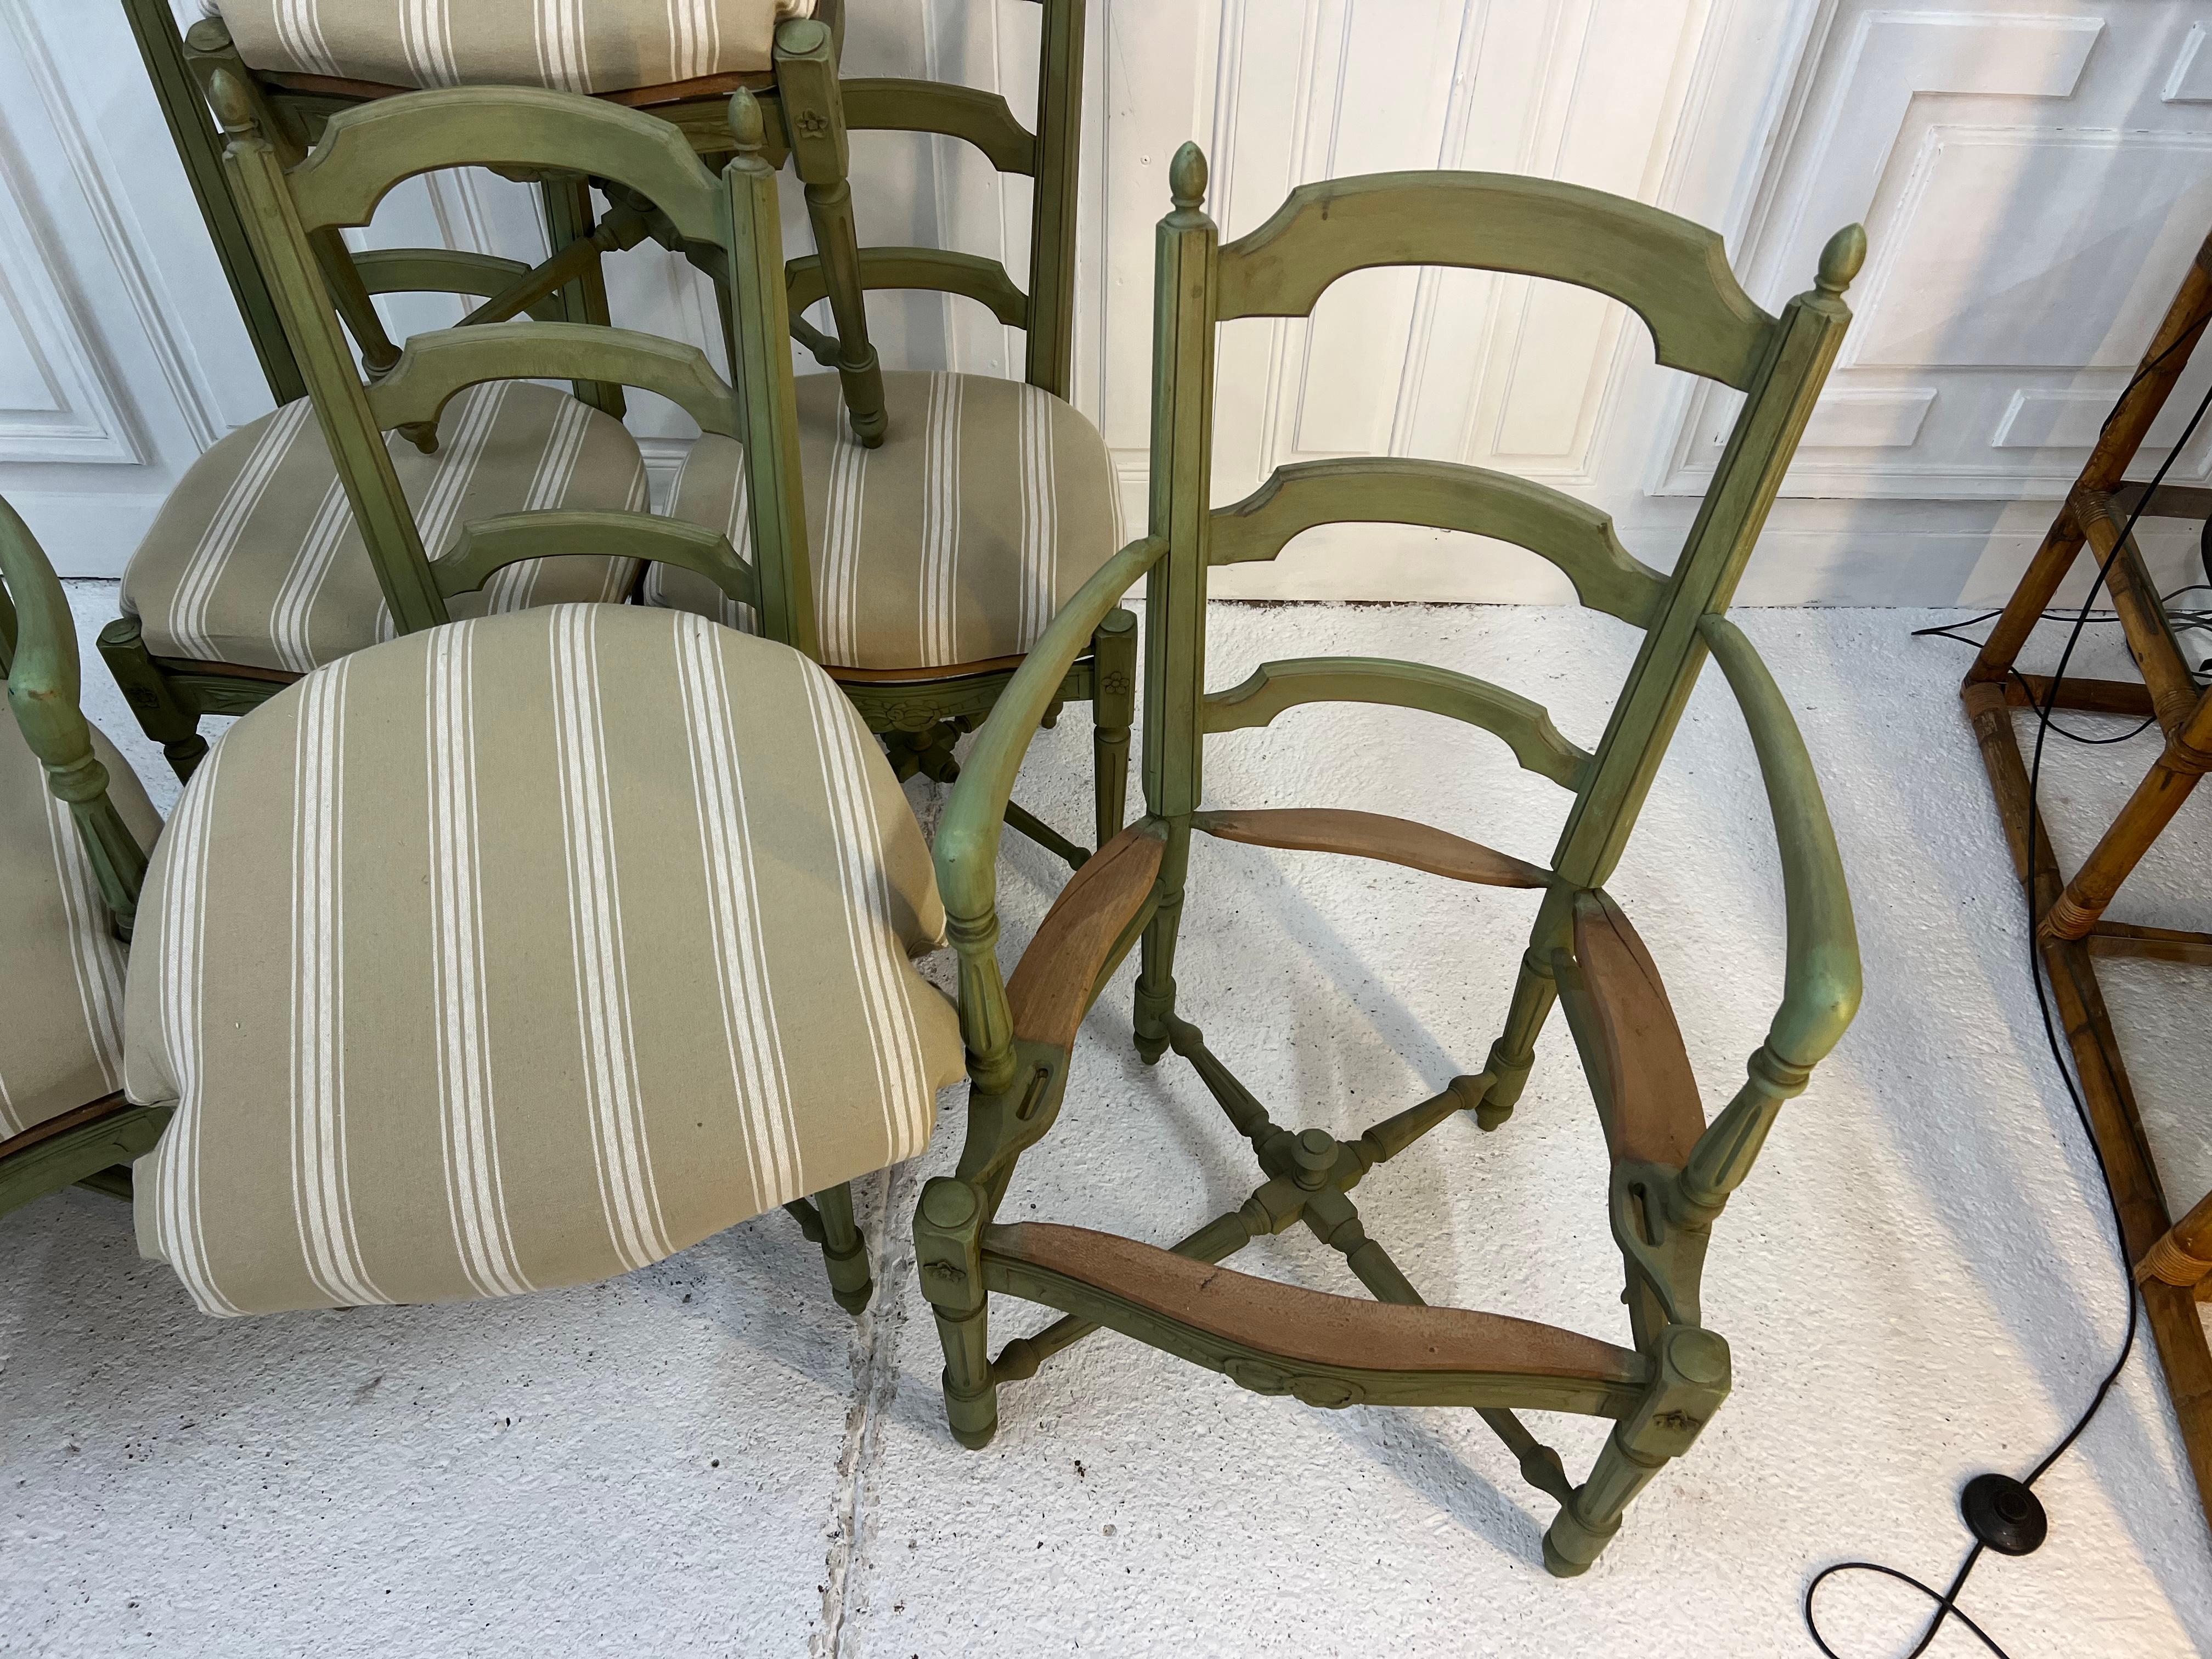 4 chairs and 2 Louis XVI style armchairs with green patina
the seats have been reupholstered in a mattress fabric
the pediments are finely sculpted with Louis XVI garlands, the base is in X shaped tops
the seats will be easily to customize to